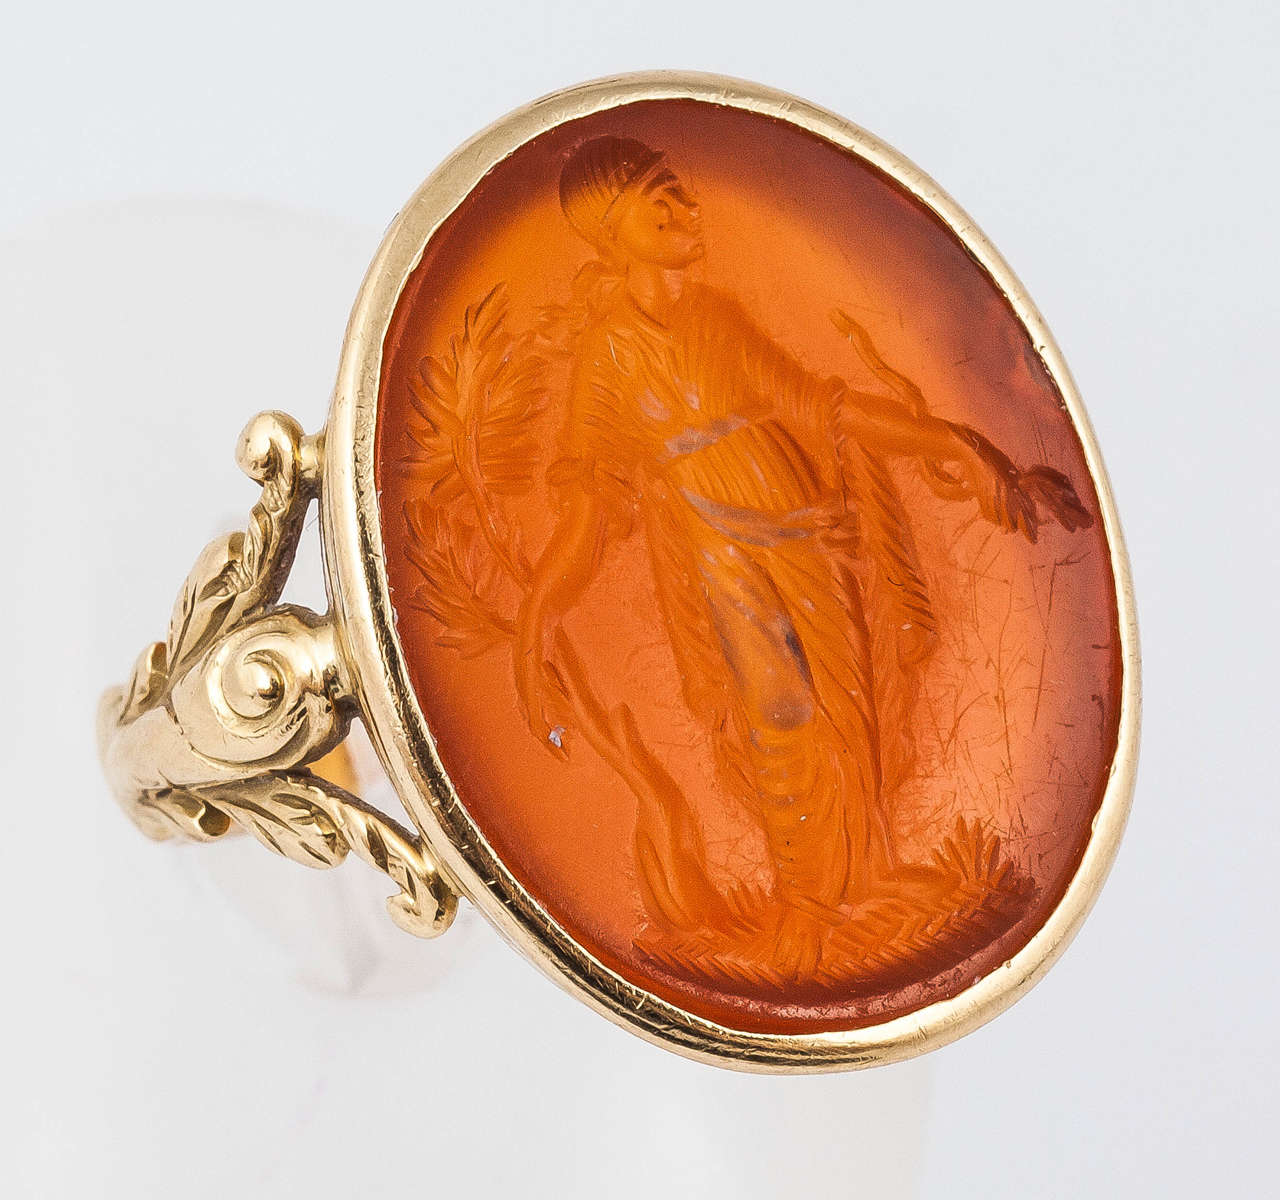 Interesting Carnelian intaglio signet ring with classical engraving in 18ct Gold setting. Finger size U